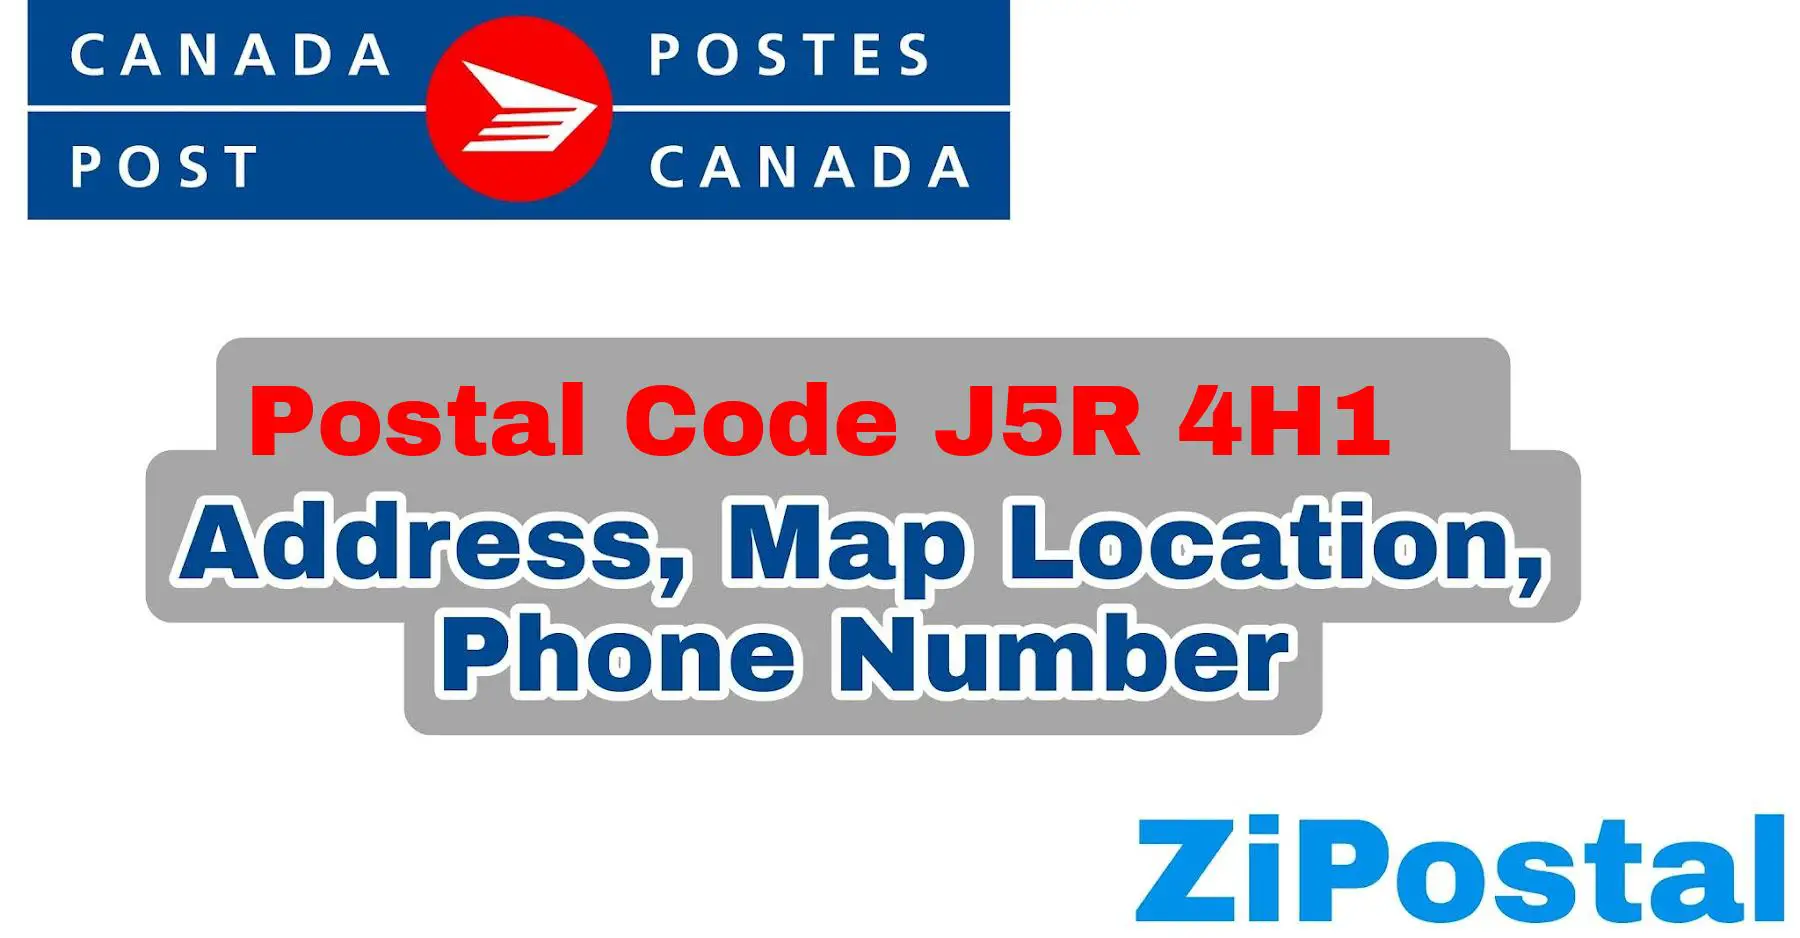 Postal Code J5R 4H1 Address Map Location and Phone Number